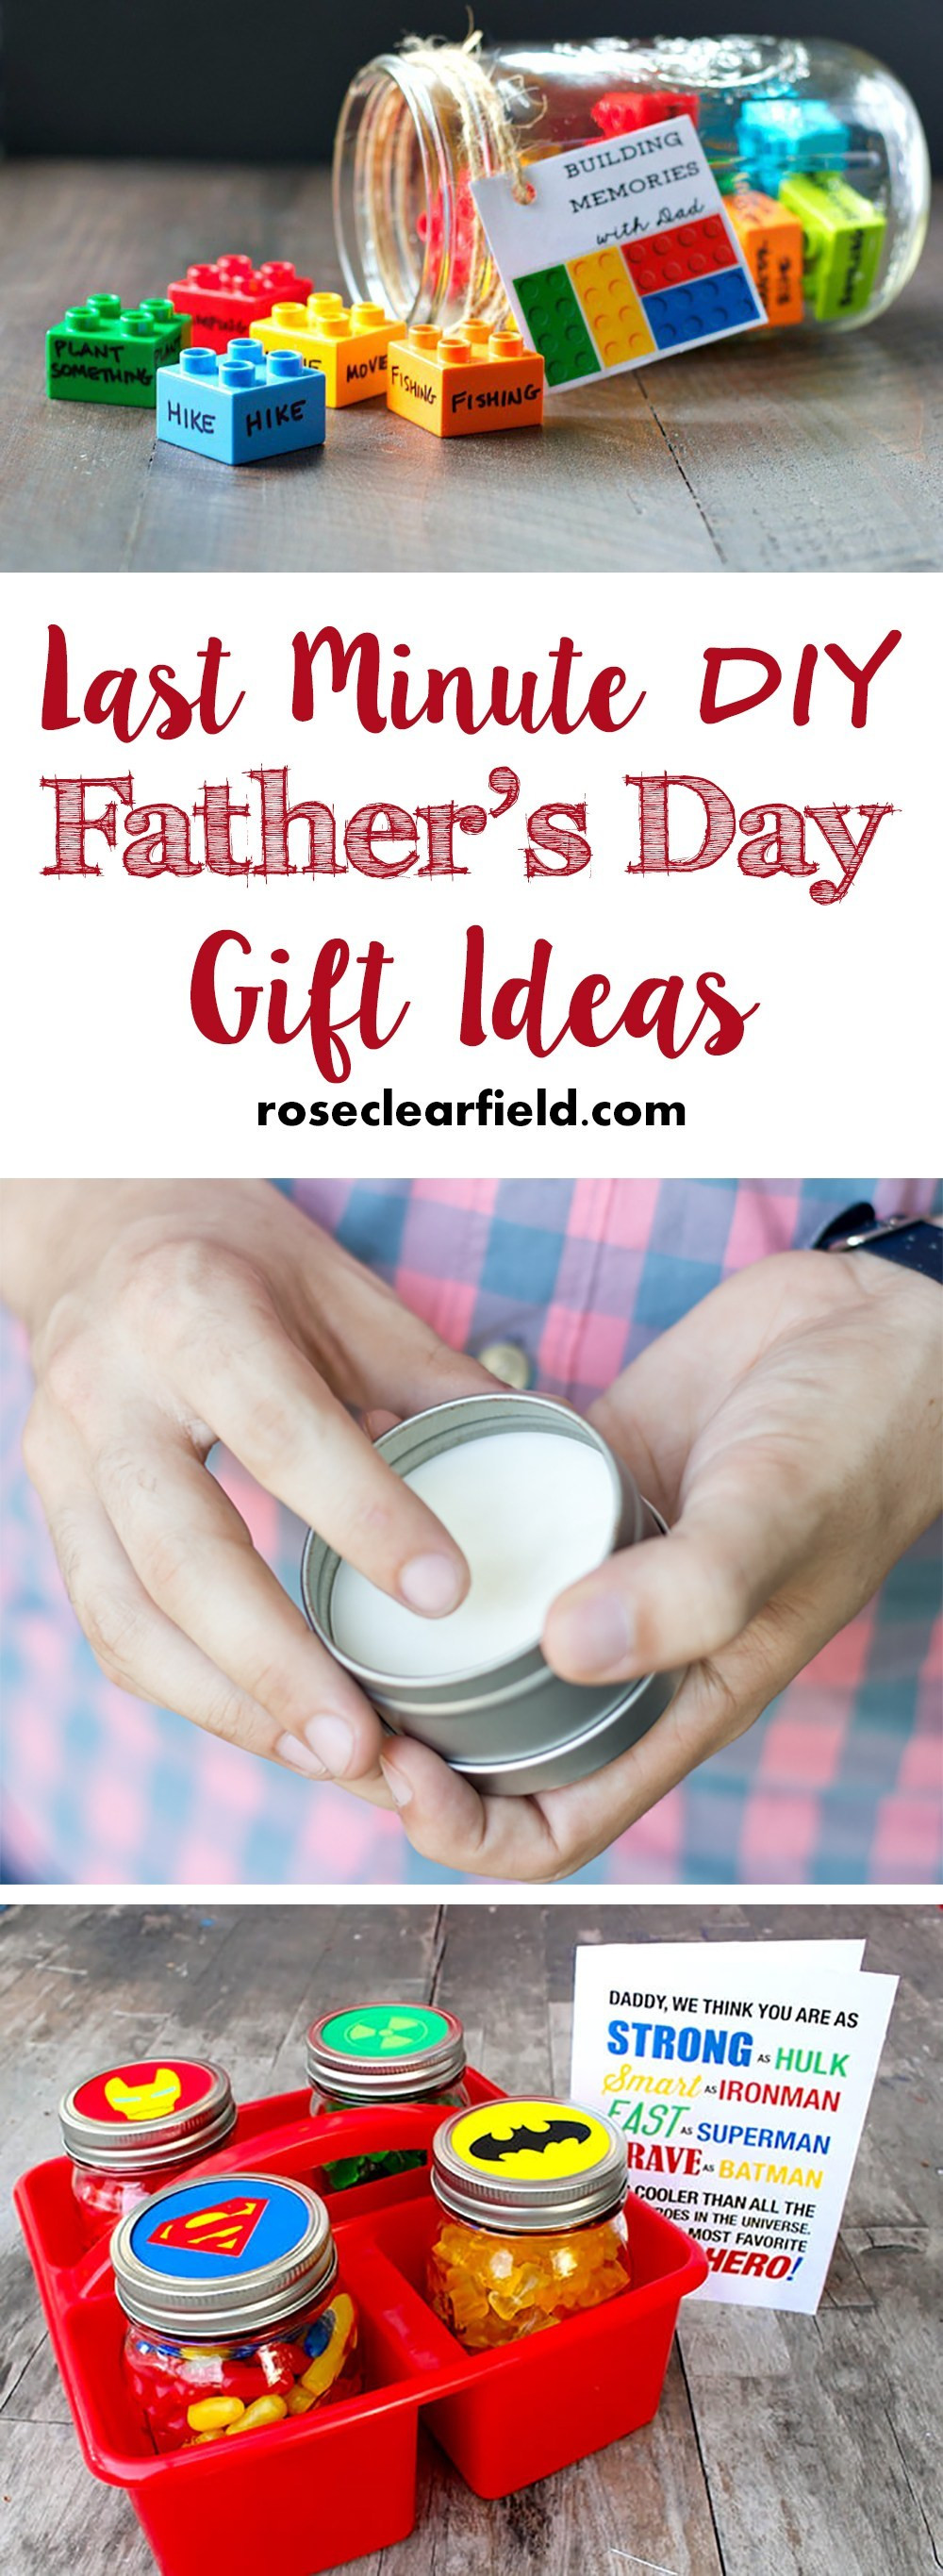 Last Minute Mother'S Day Gift Ideas
 Last Minute DIY Father s Day Gift Ideas • Rose Clearfield